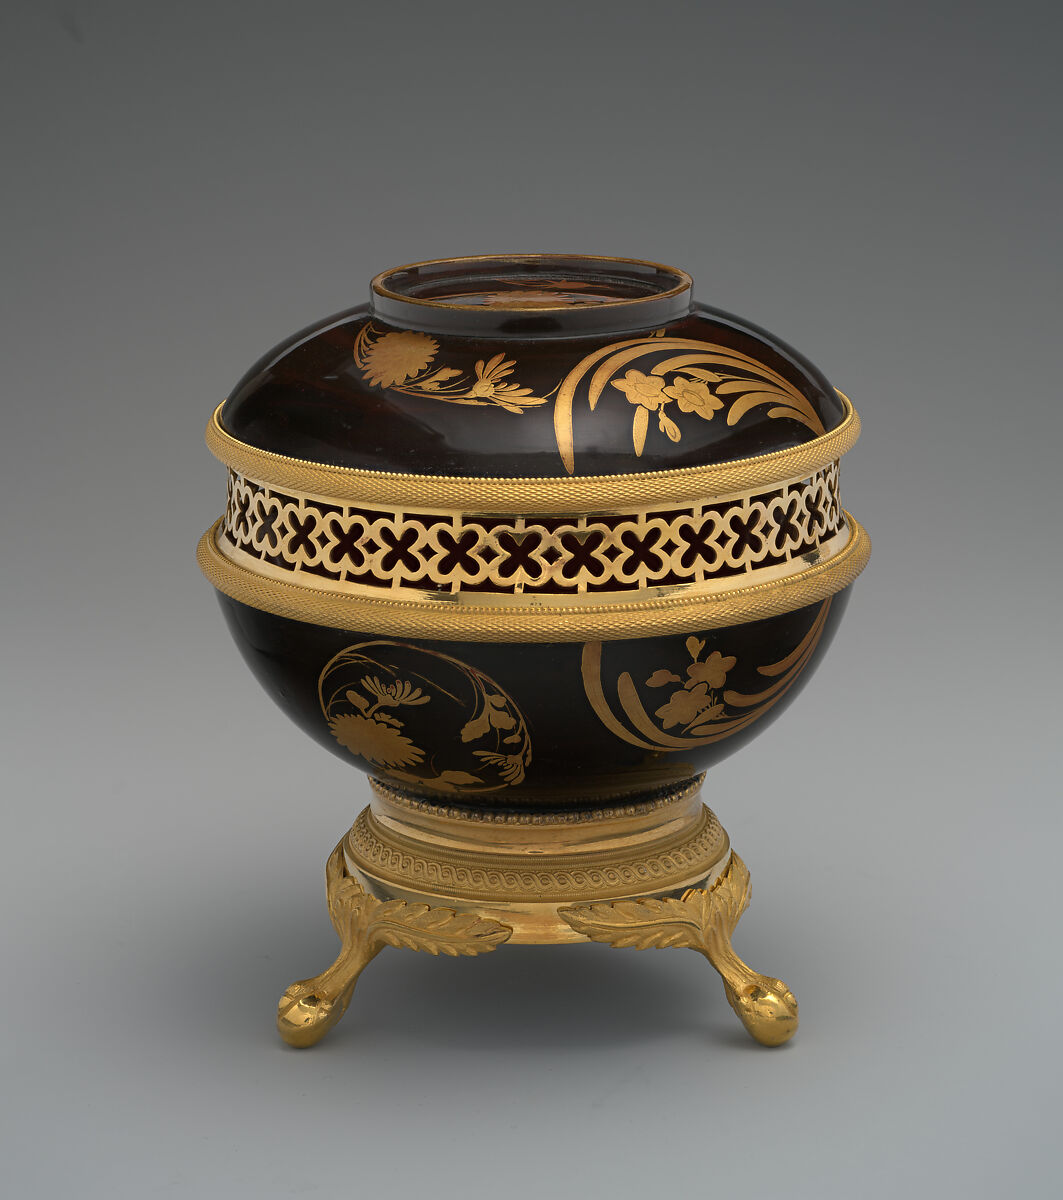 Potpourri vessel, attributed to Benjamin Vulliamy (British, 1747–1811), Japanese lacquered wood, gilded-bronze mounts, Japanese and British, London 